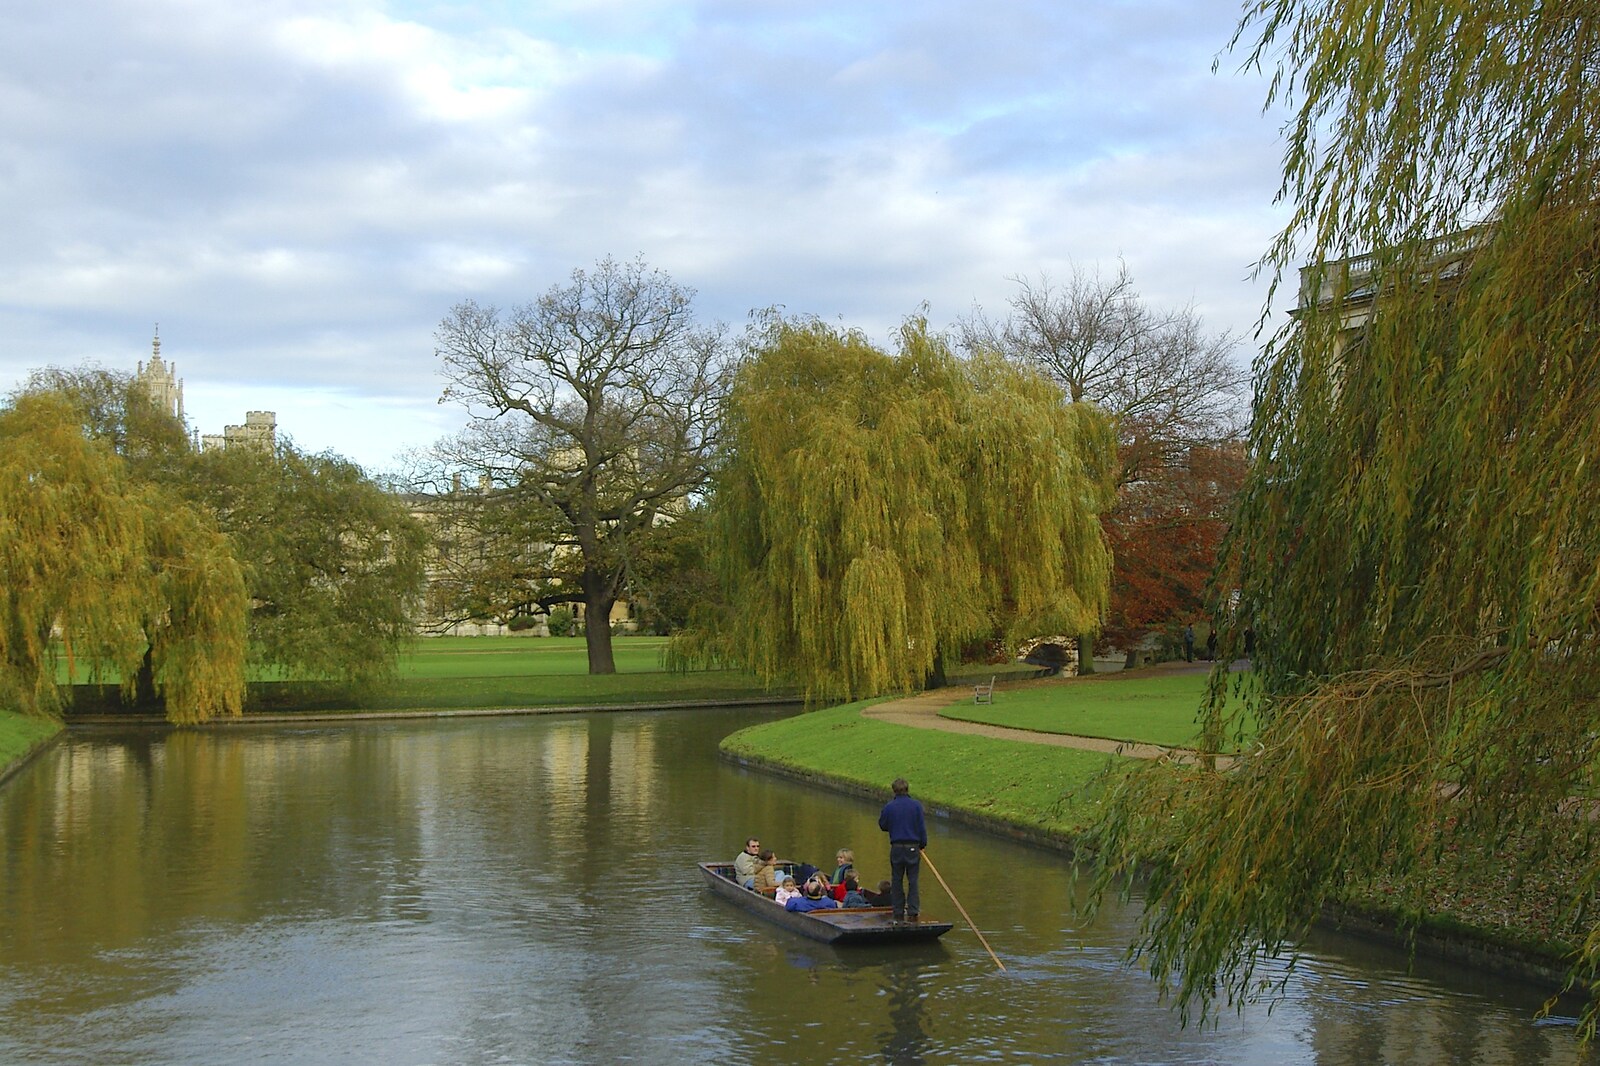 Punting near Trinity college from Autumn Colleges: a Wander around The Backs, Cambridge - 26th November